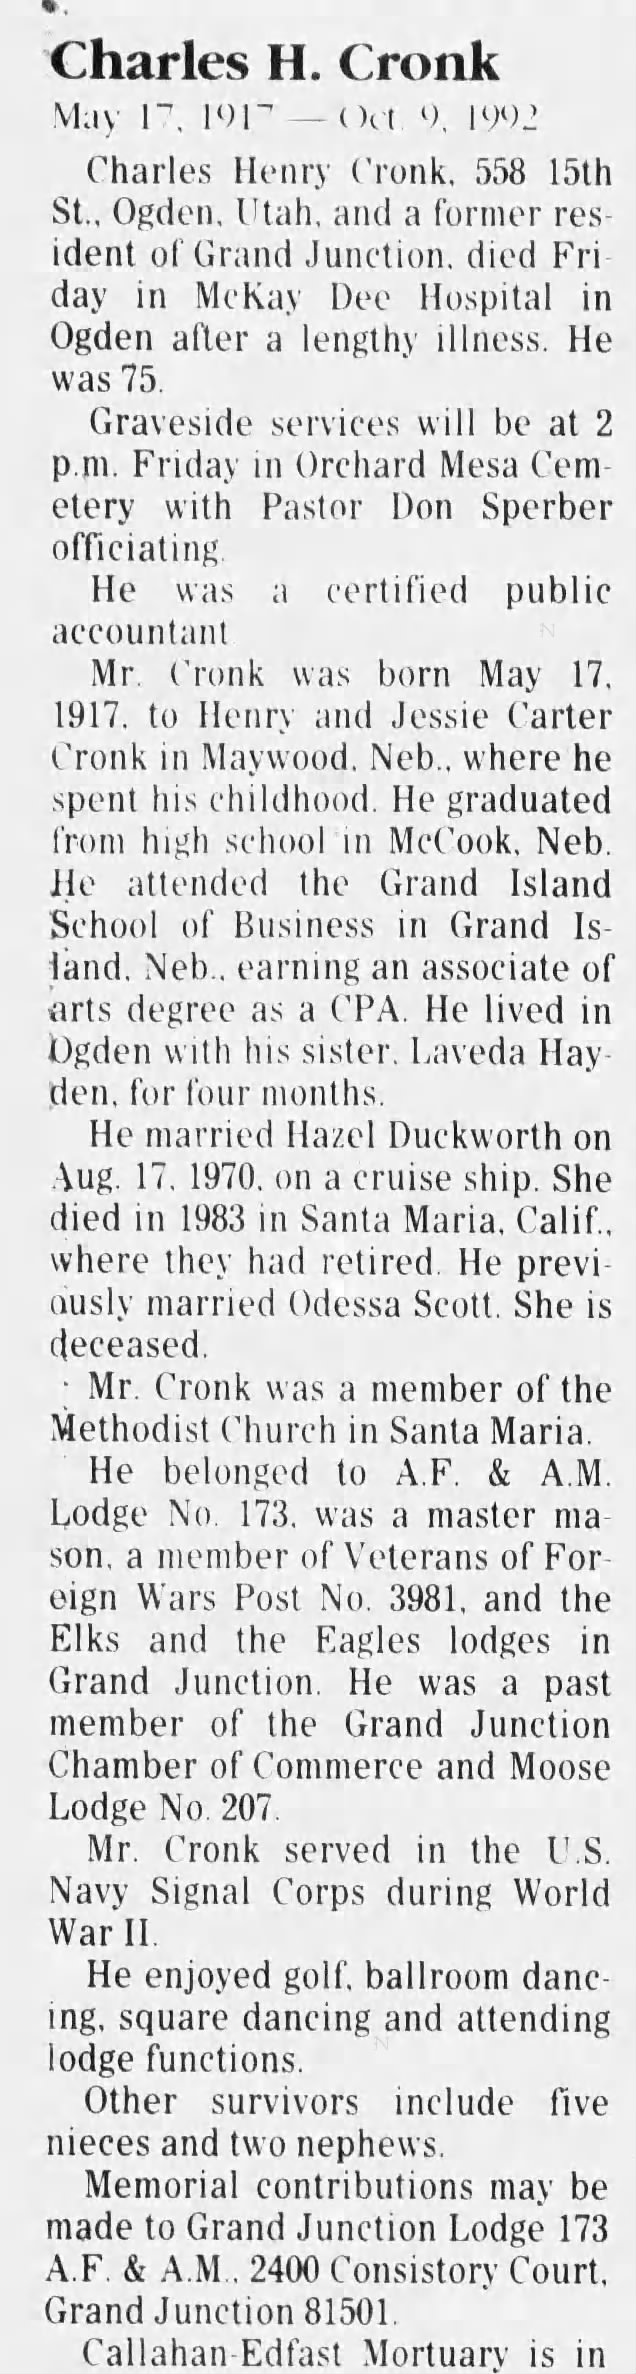 Obituary for Charles Henry Cronk